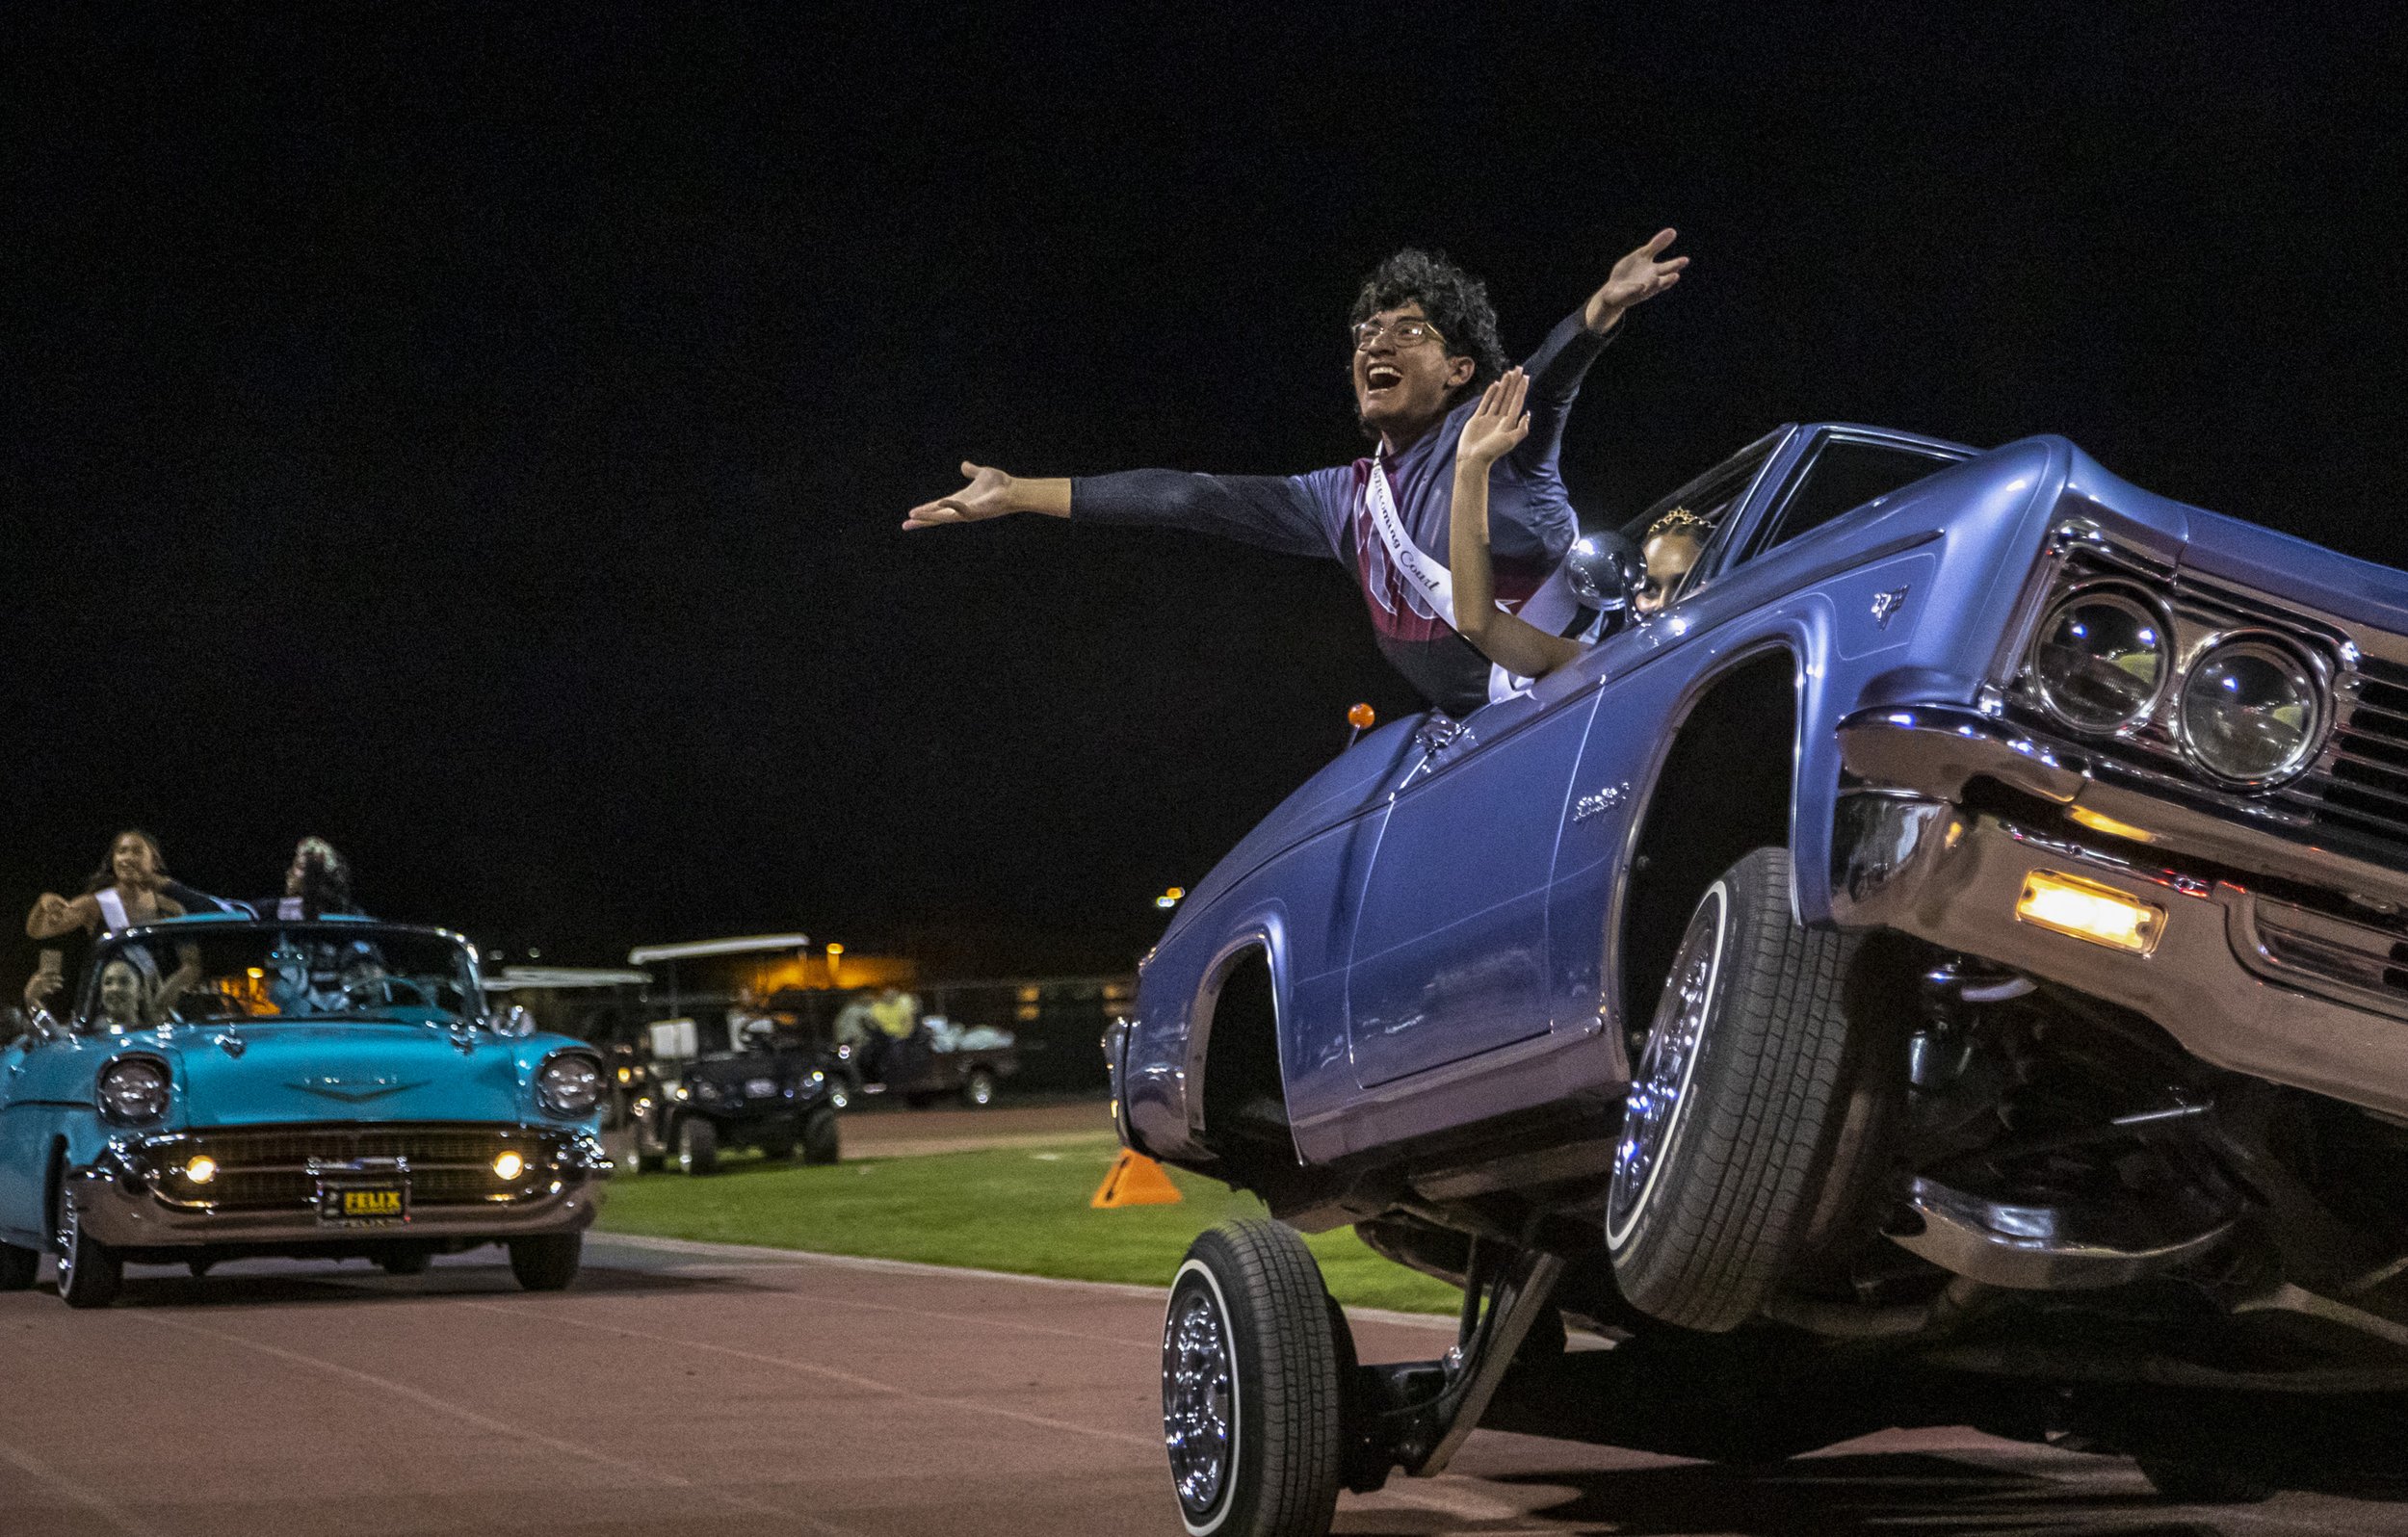  La Quinta homecoming court members Andres Dominguez, 17, and Jaydyn Leon, 17, wave to the crowd as they’re driven out in a parade of low riders during halftime at La Quinta High School in La Quinta, Calif., Friday.  